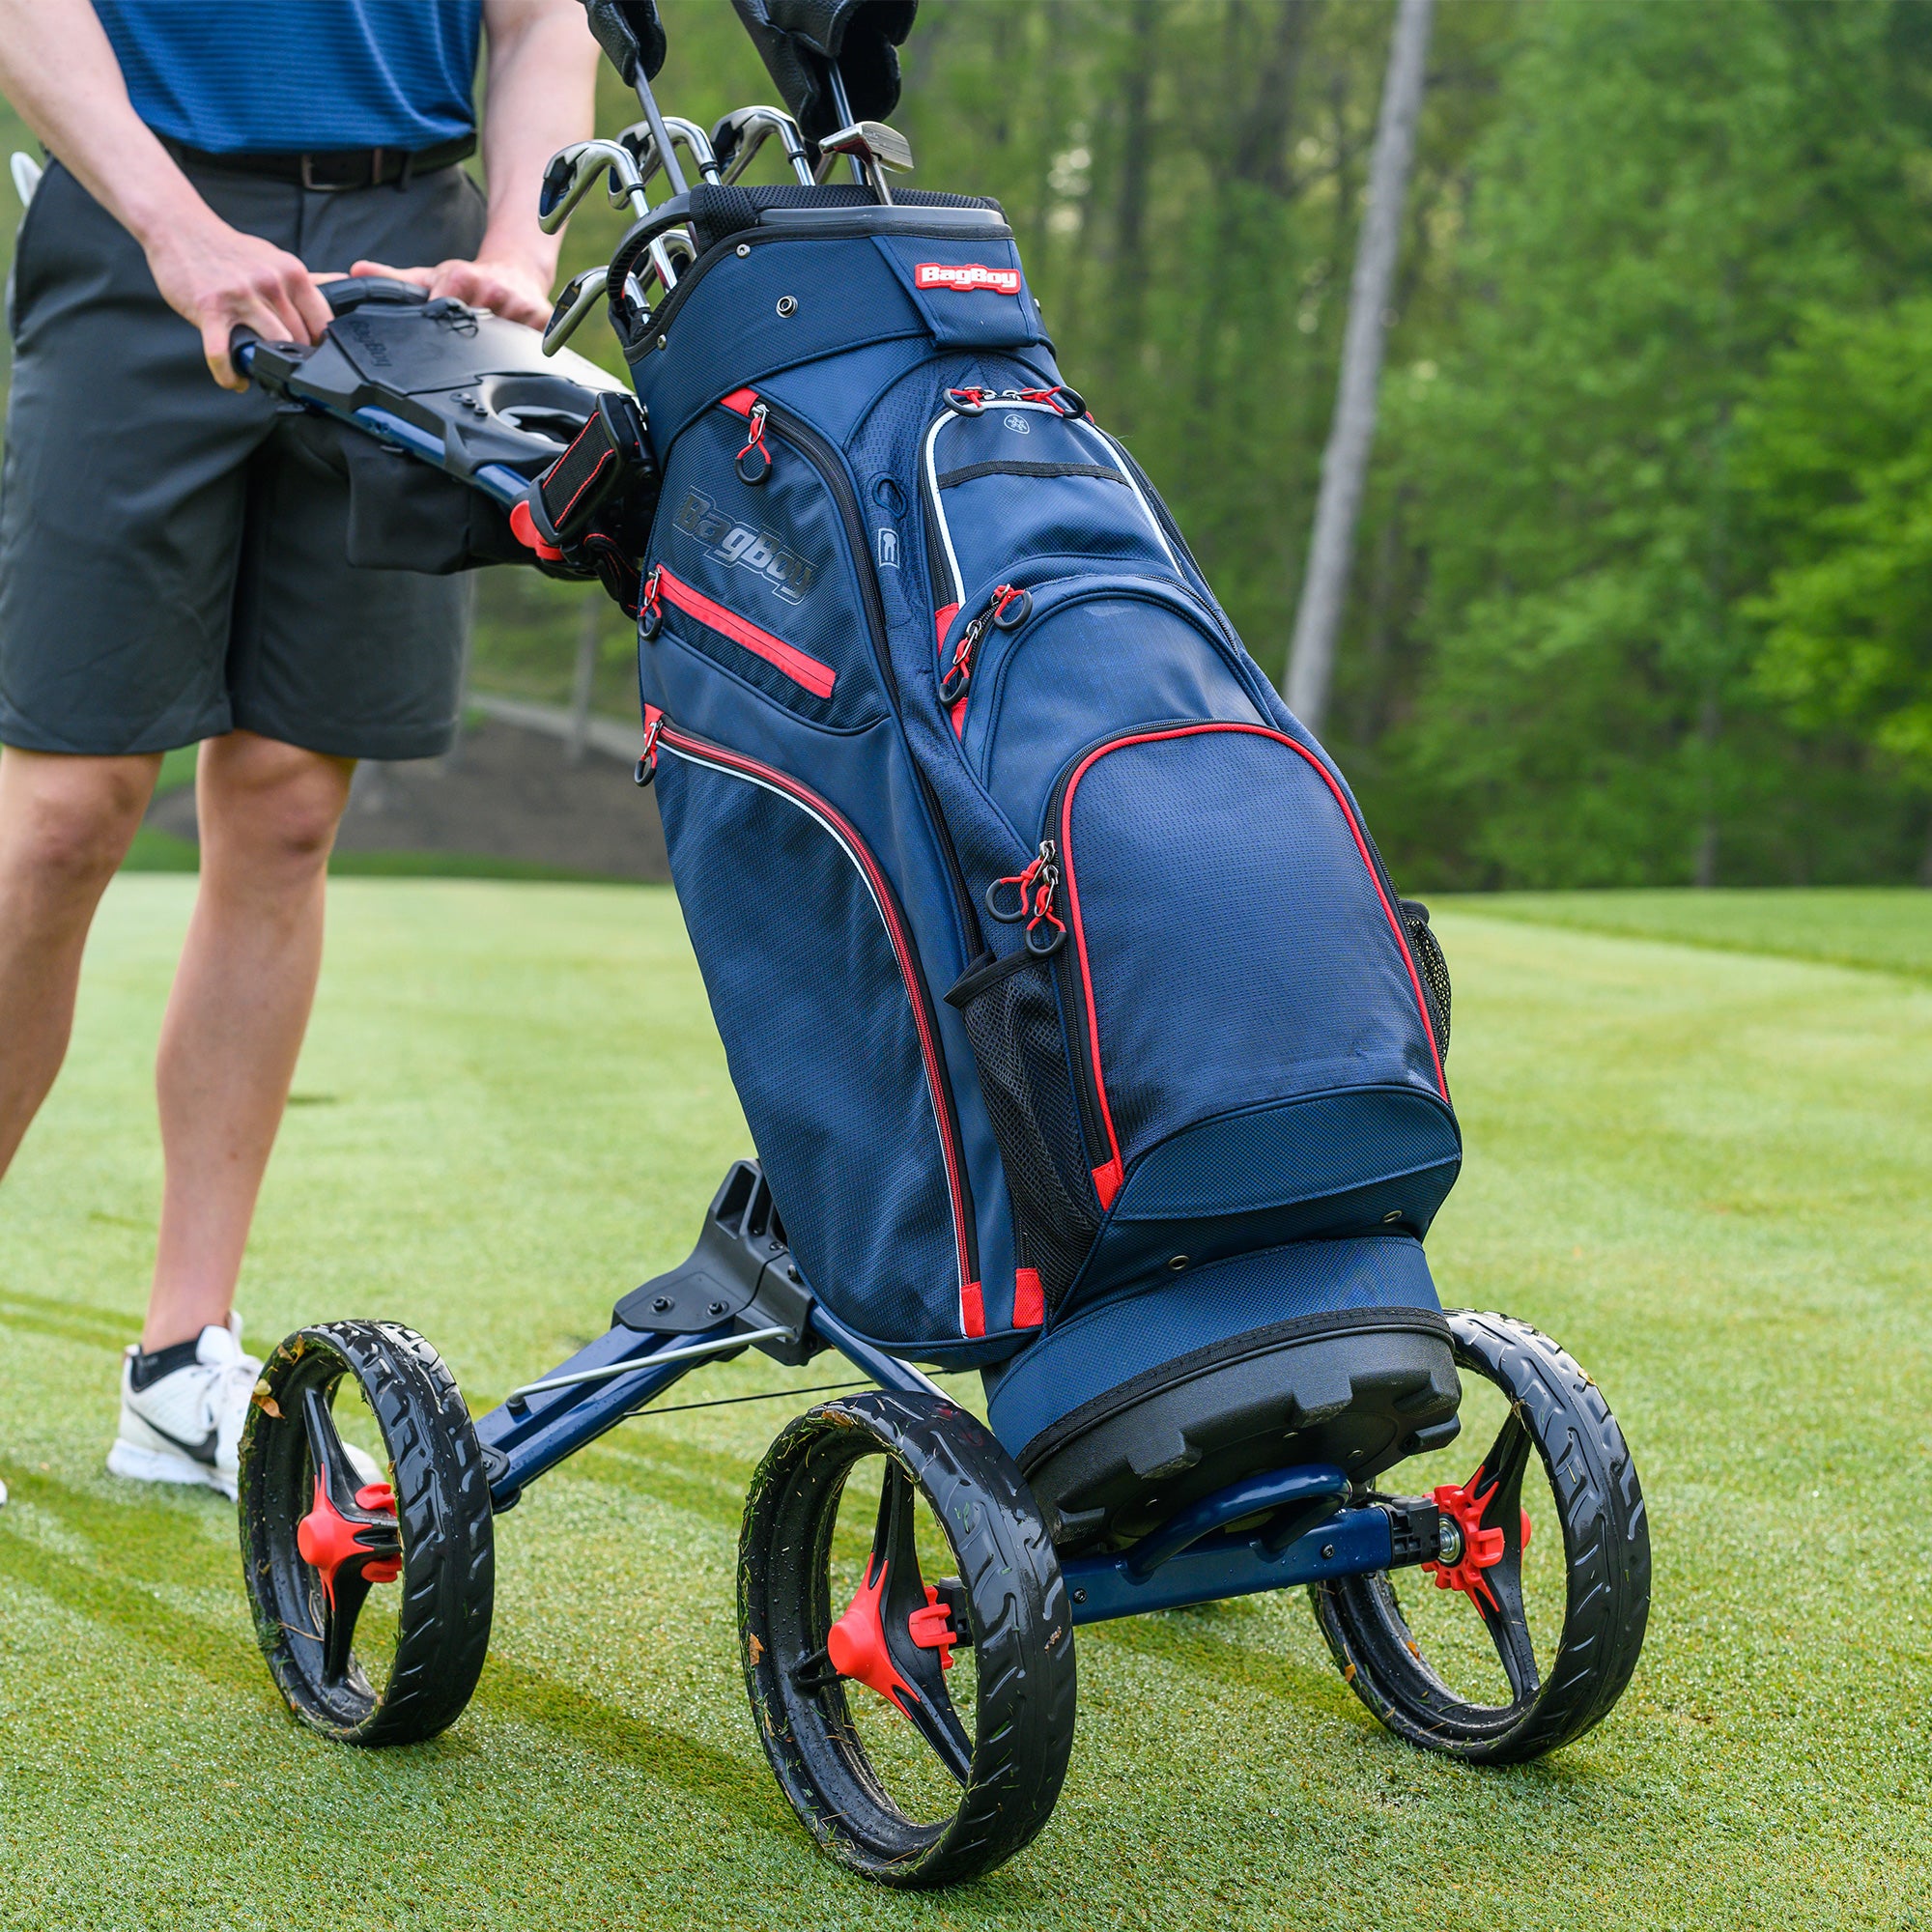 Dynamic Brands | Premium Golf & Leisure Products